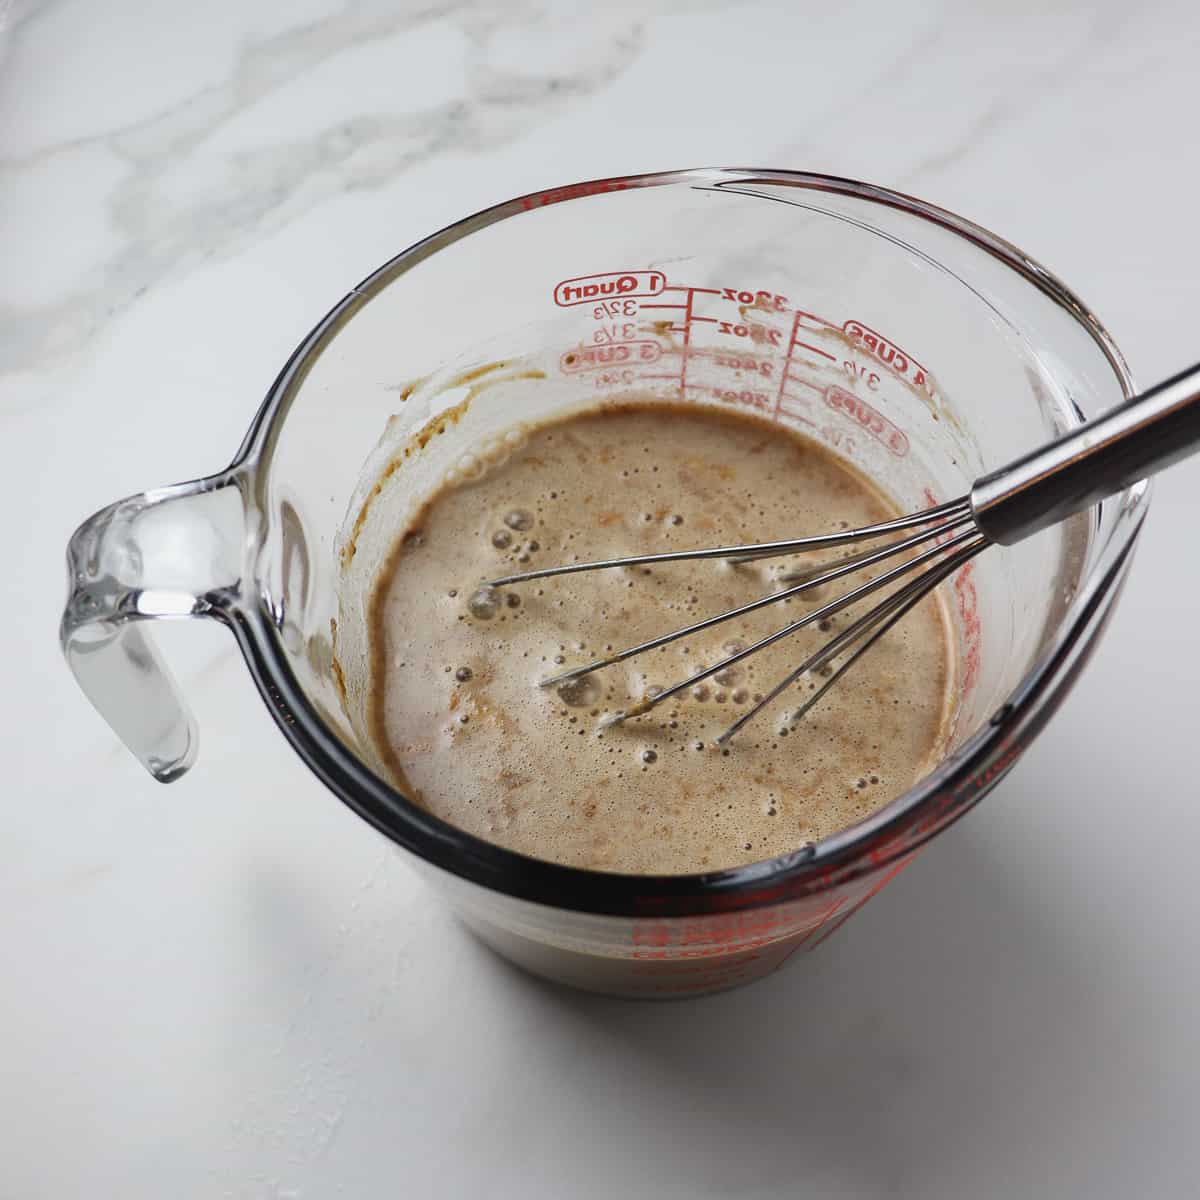 mixing the gravy and water mixture in a glass measuring cup